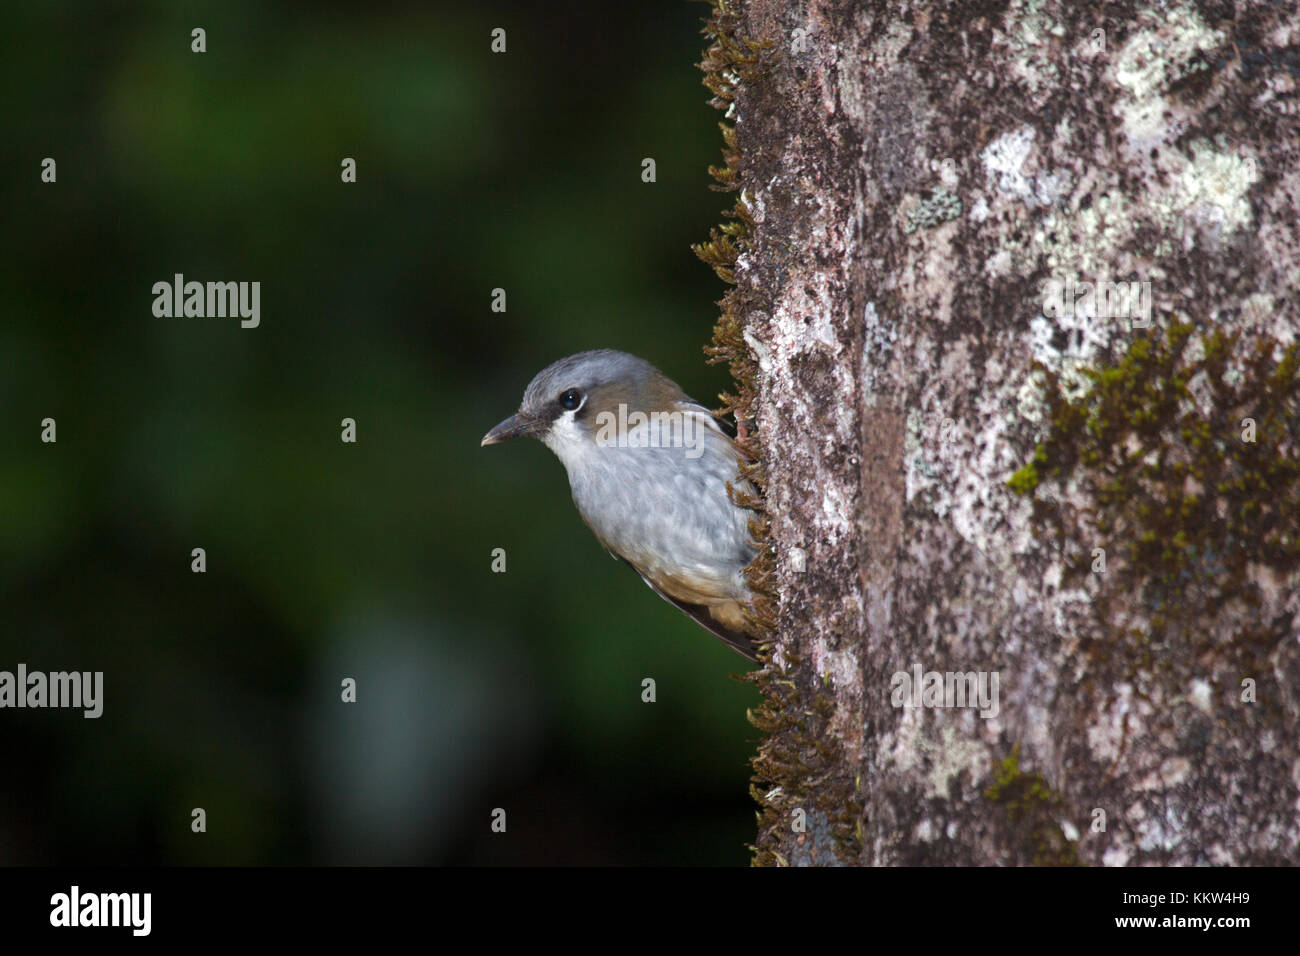 Grey headed robin an endemic species characteristically clinging to side of tree in rainforest. Queensland Australia Stock Photo